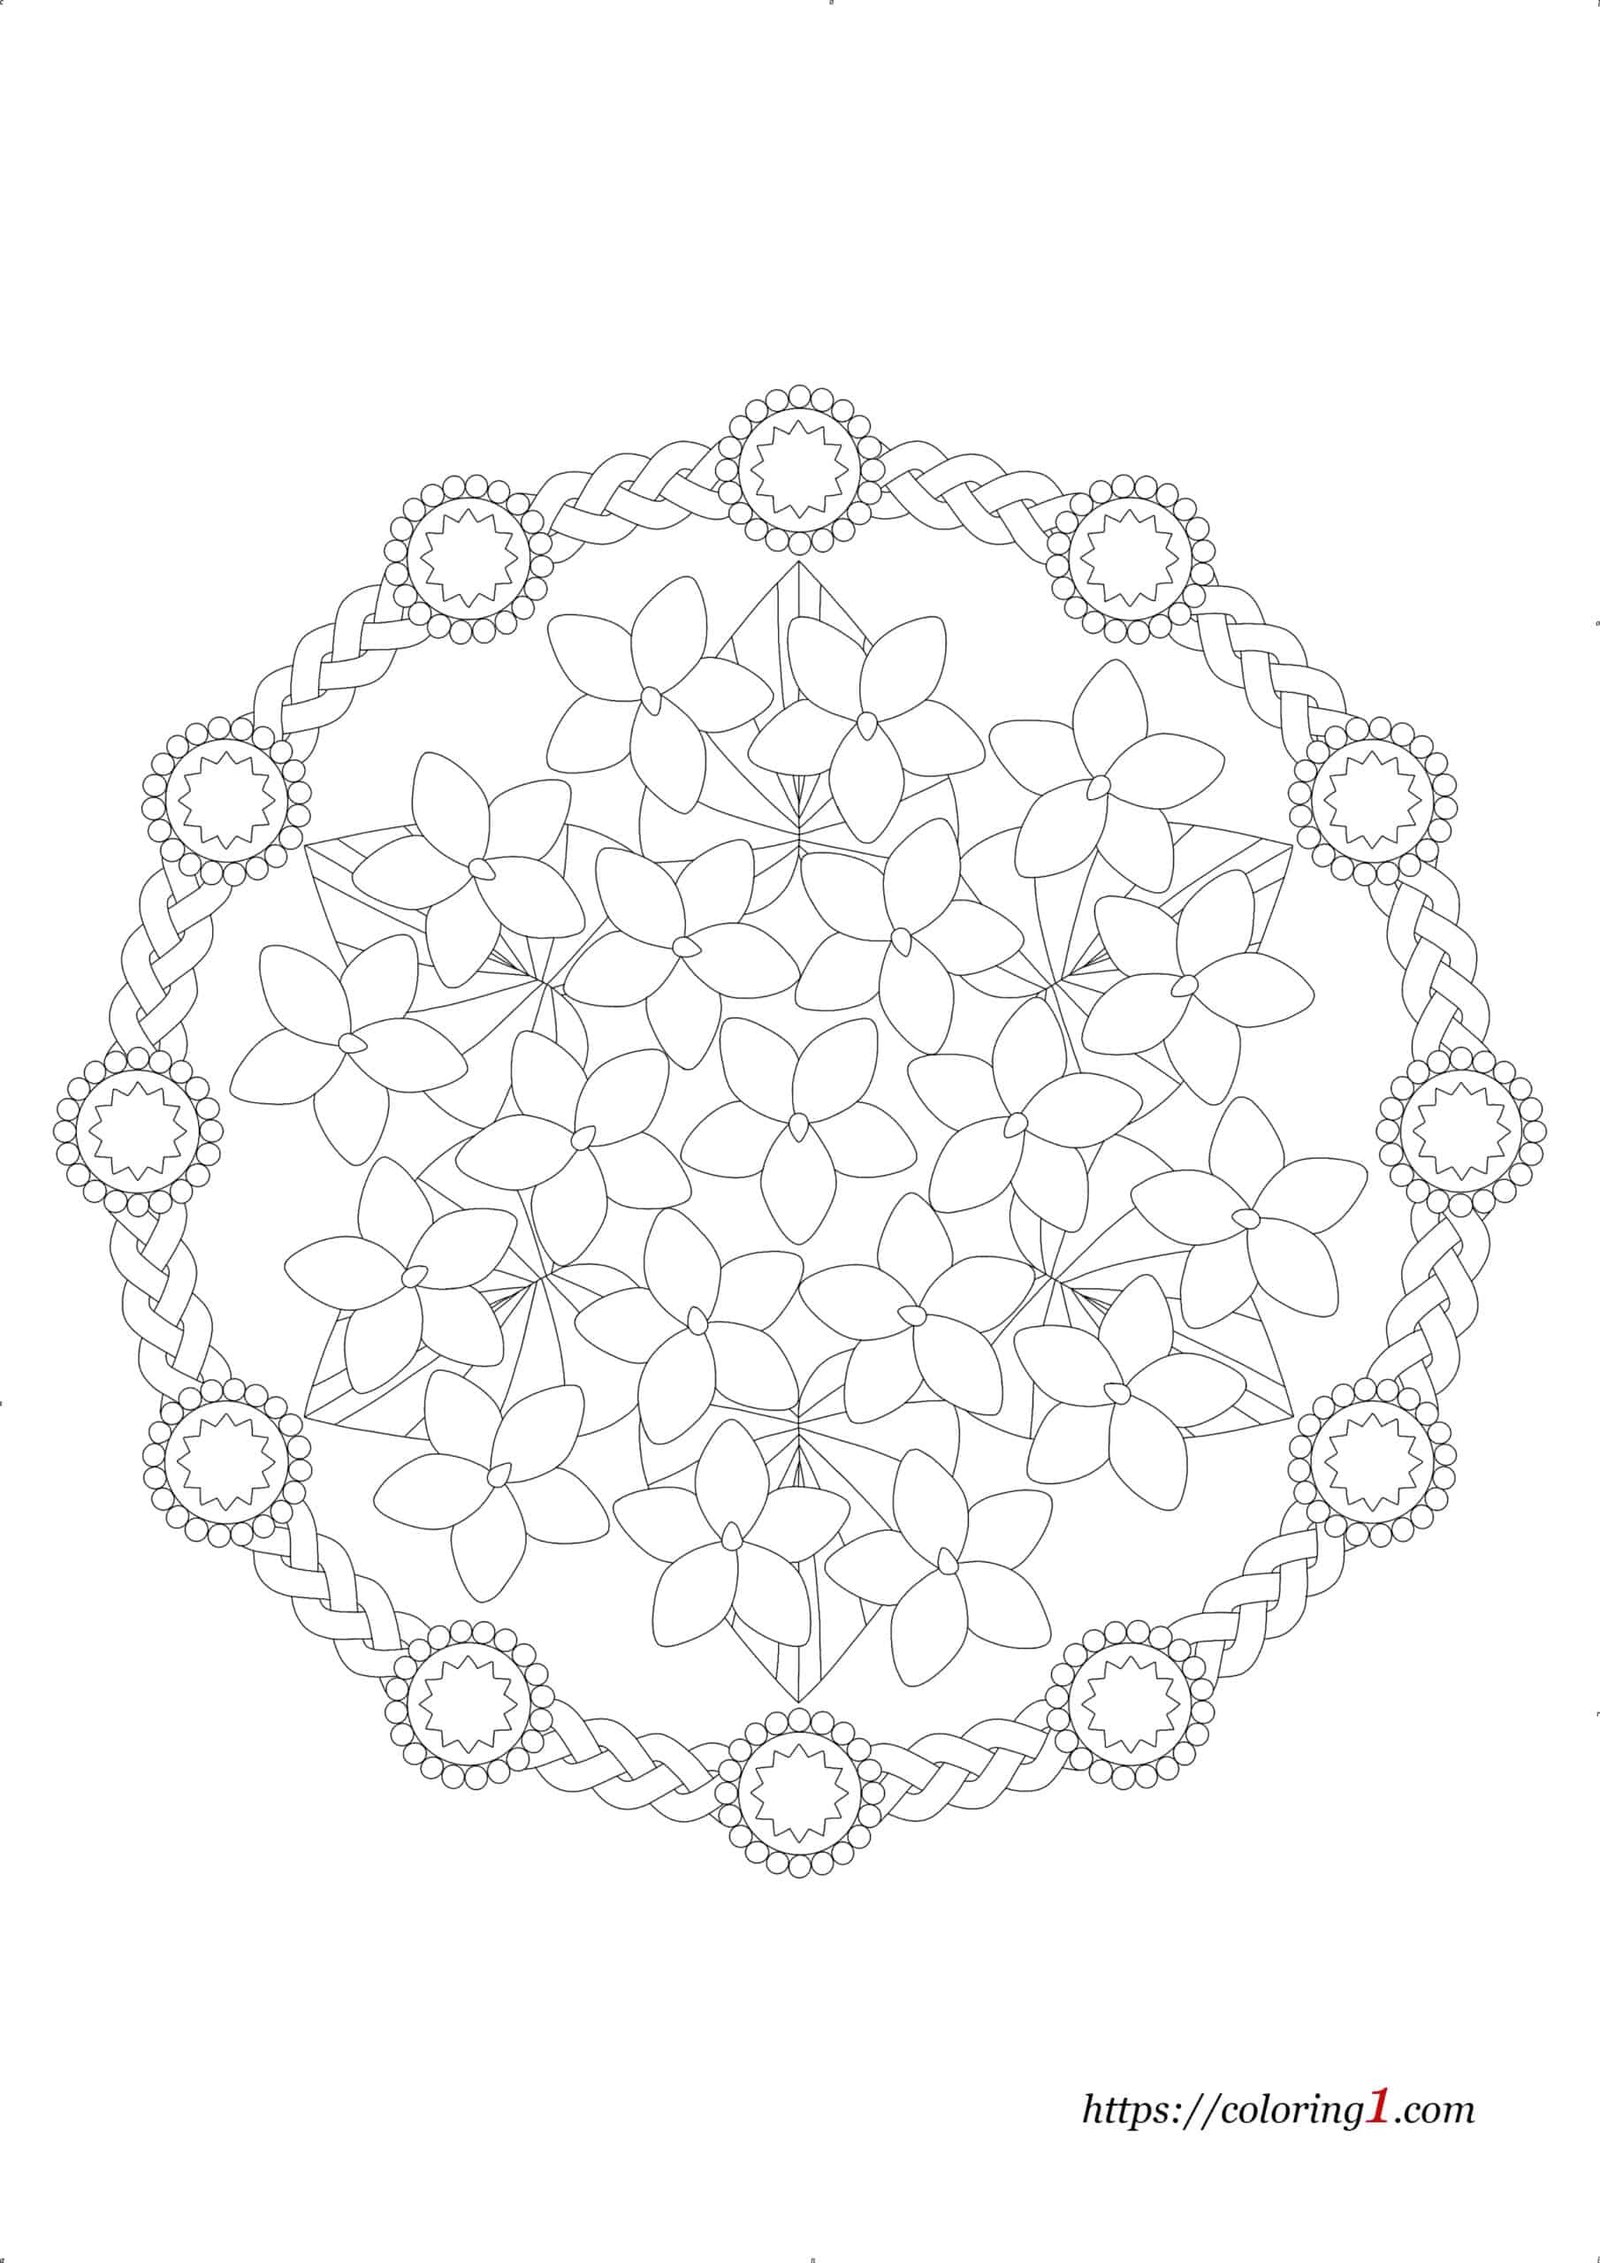 Flower Mandala hard printable coloring page for adults and kids